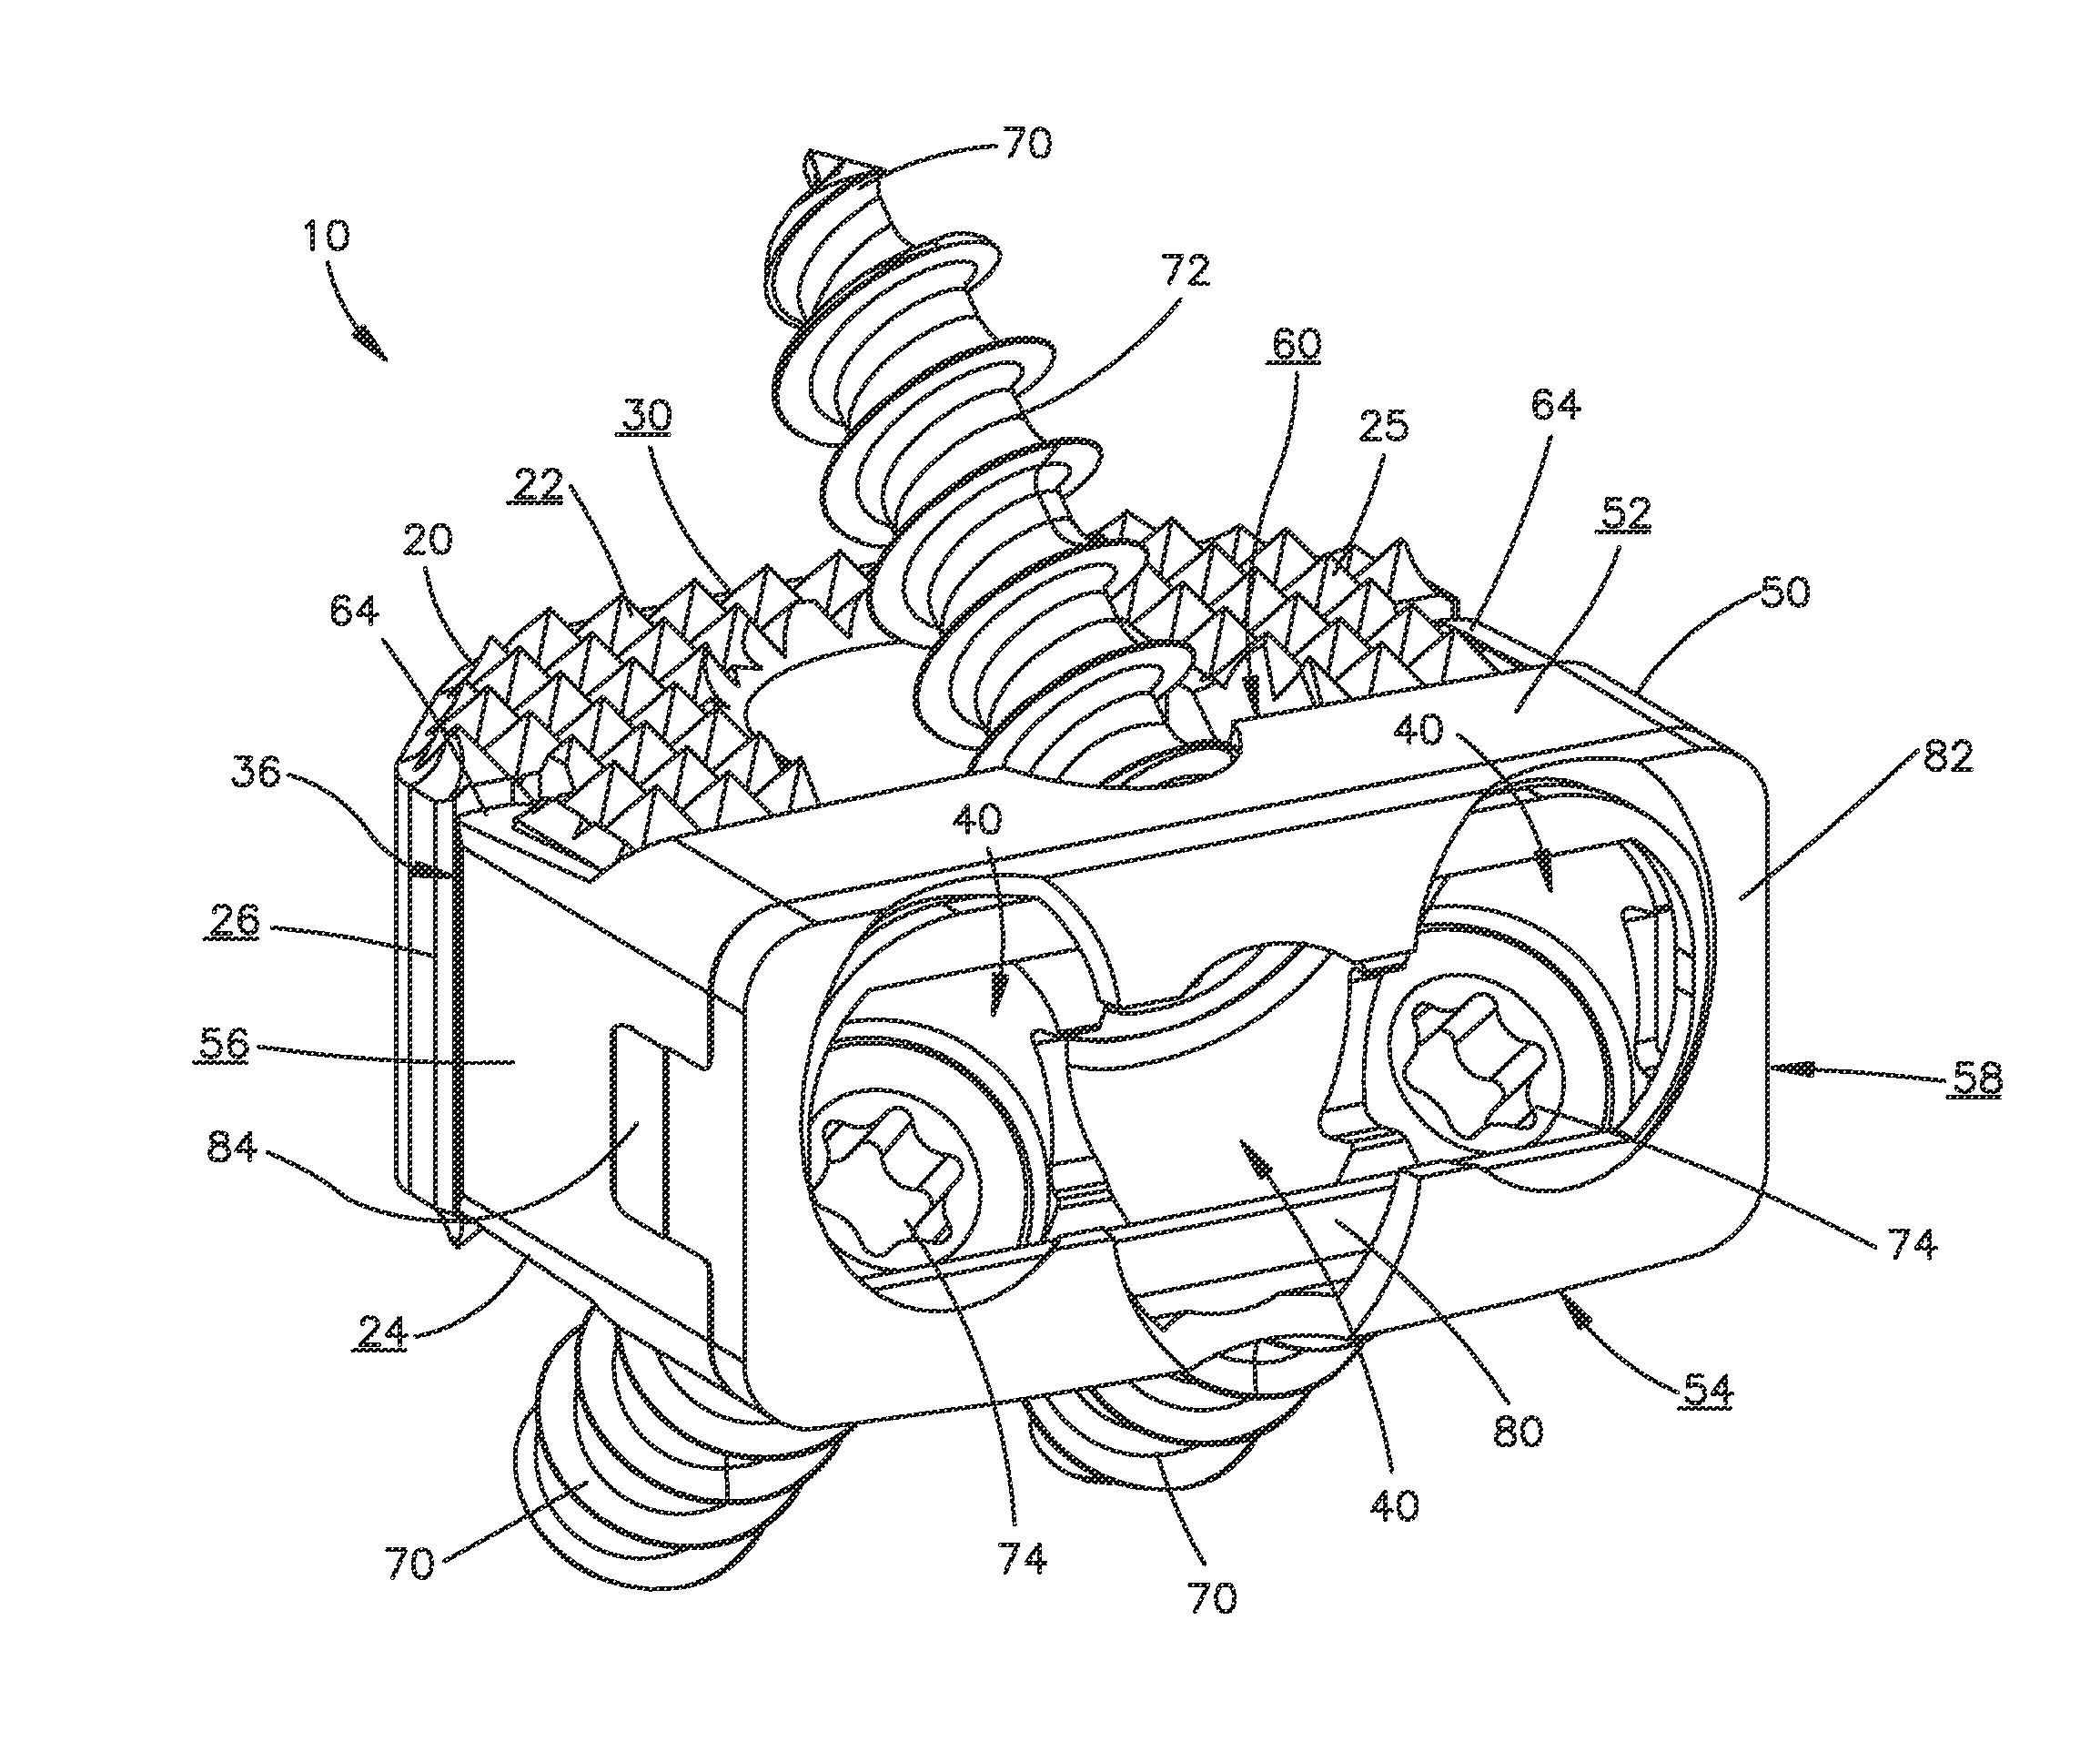 Zero-profile interbody spacer and coupled plate assembly